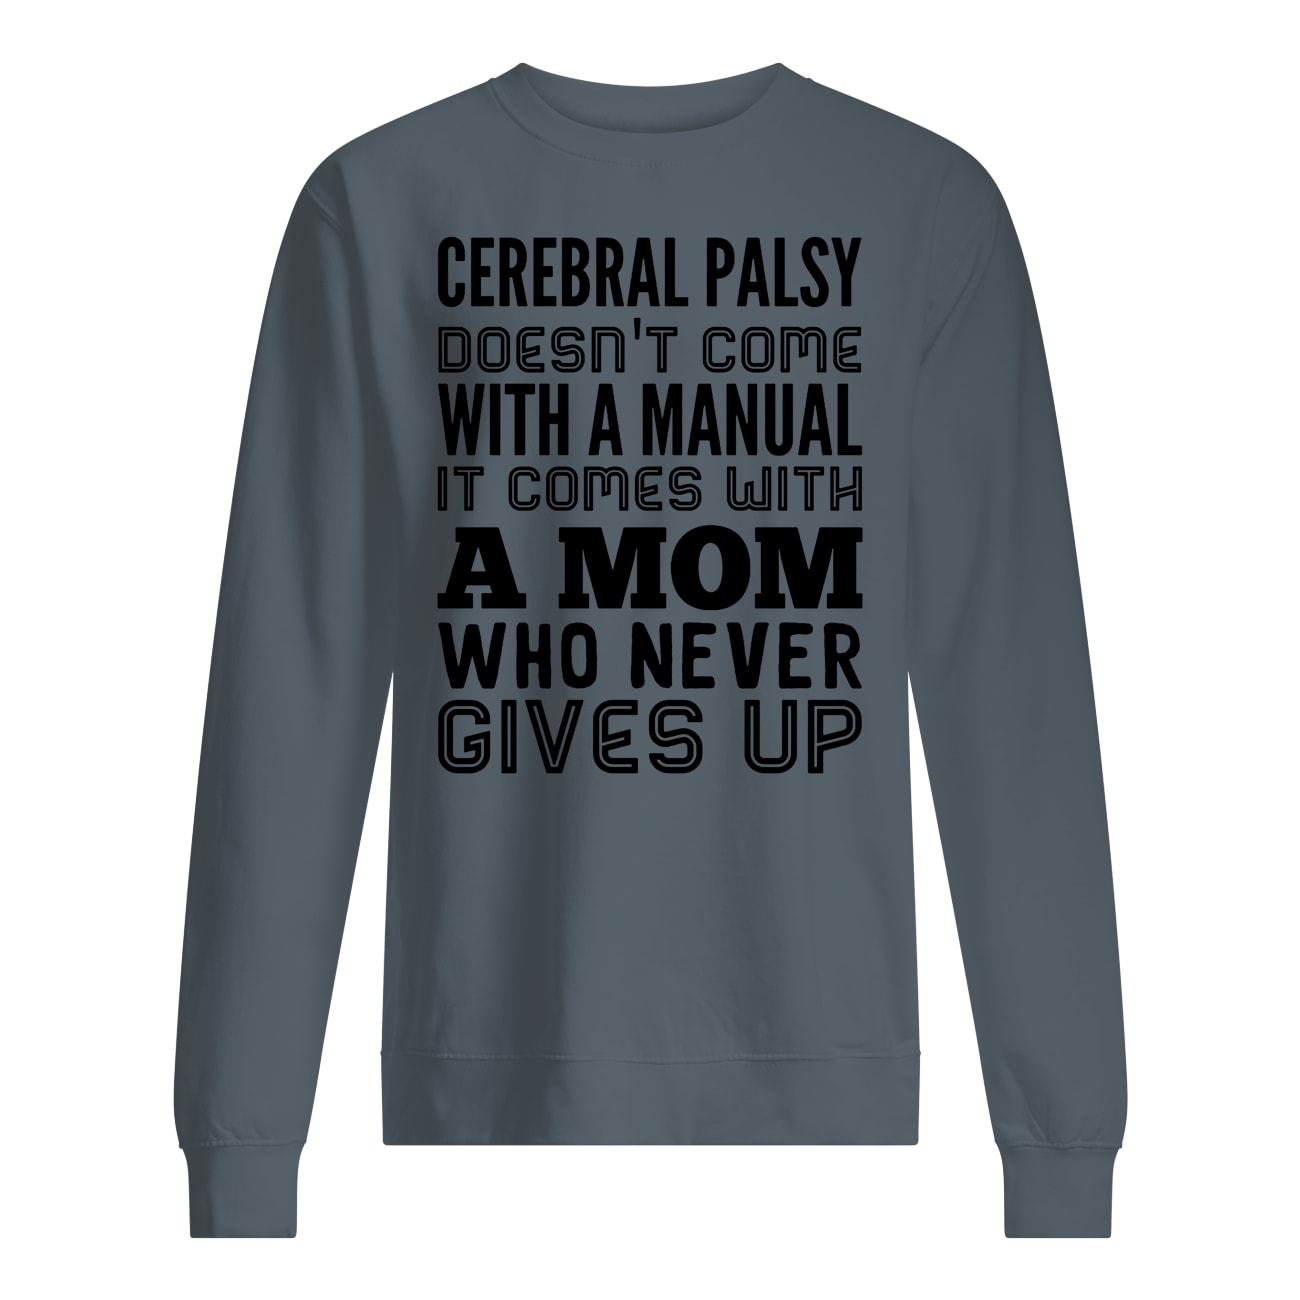 Cerebral palsy doesn't come with a manual it comes with a mom sweatshirt